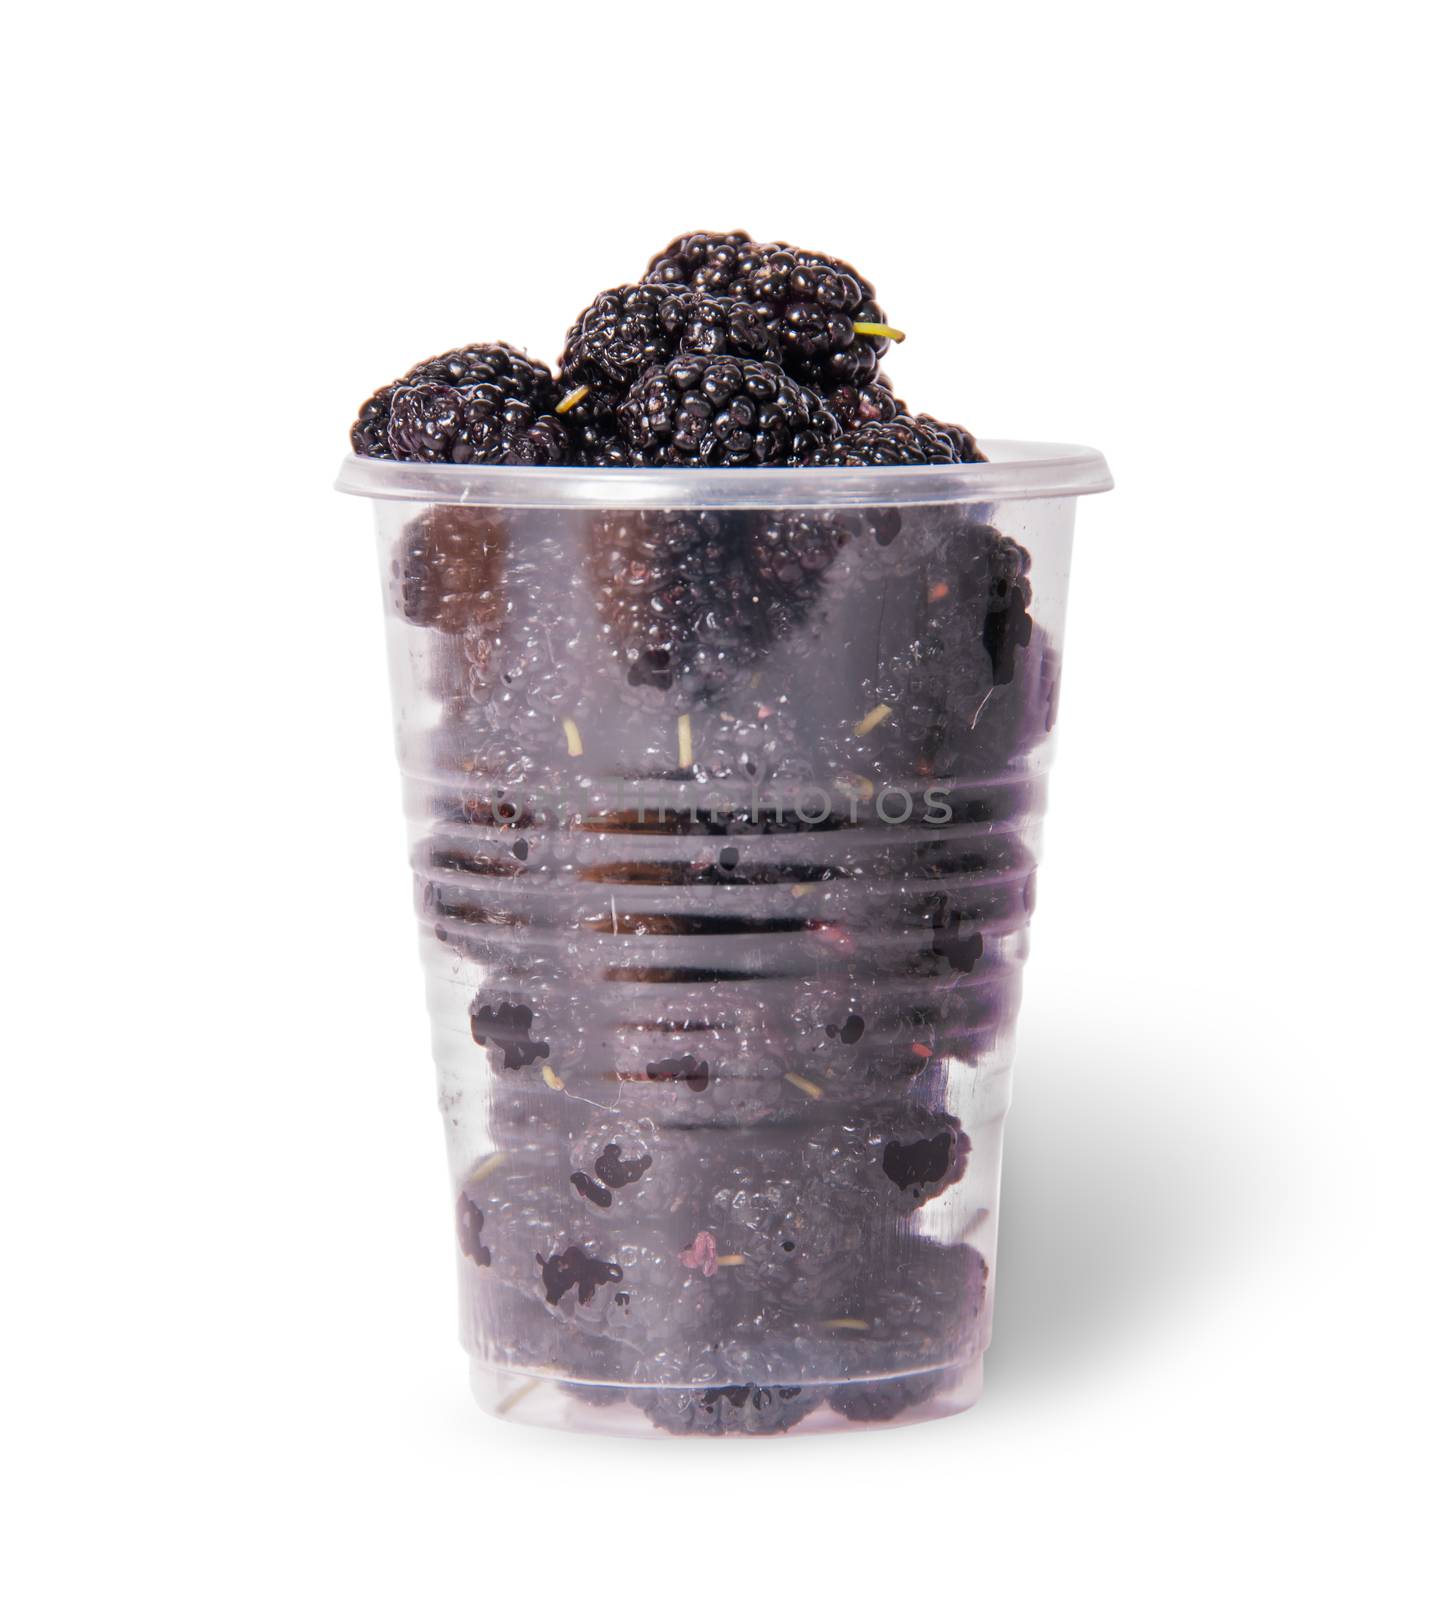 Mulberry in a plastic cup by Cipariss